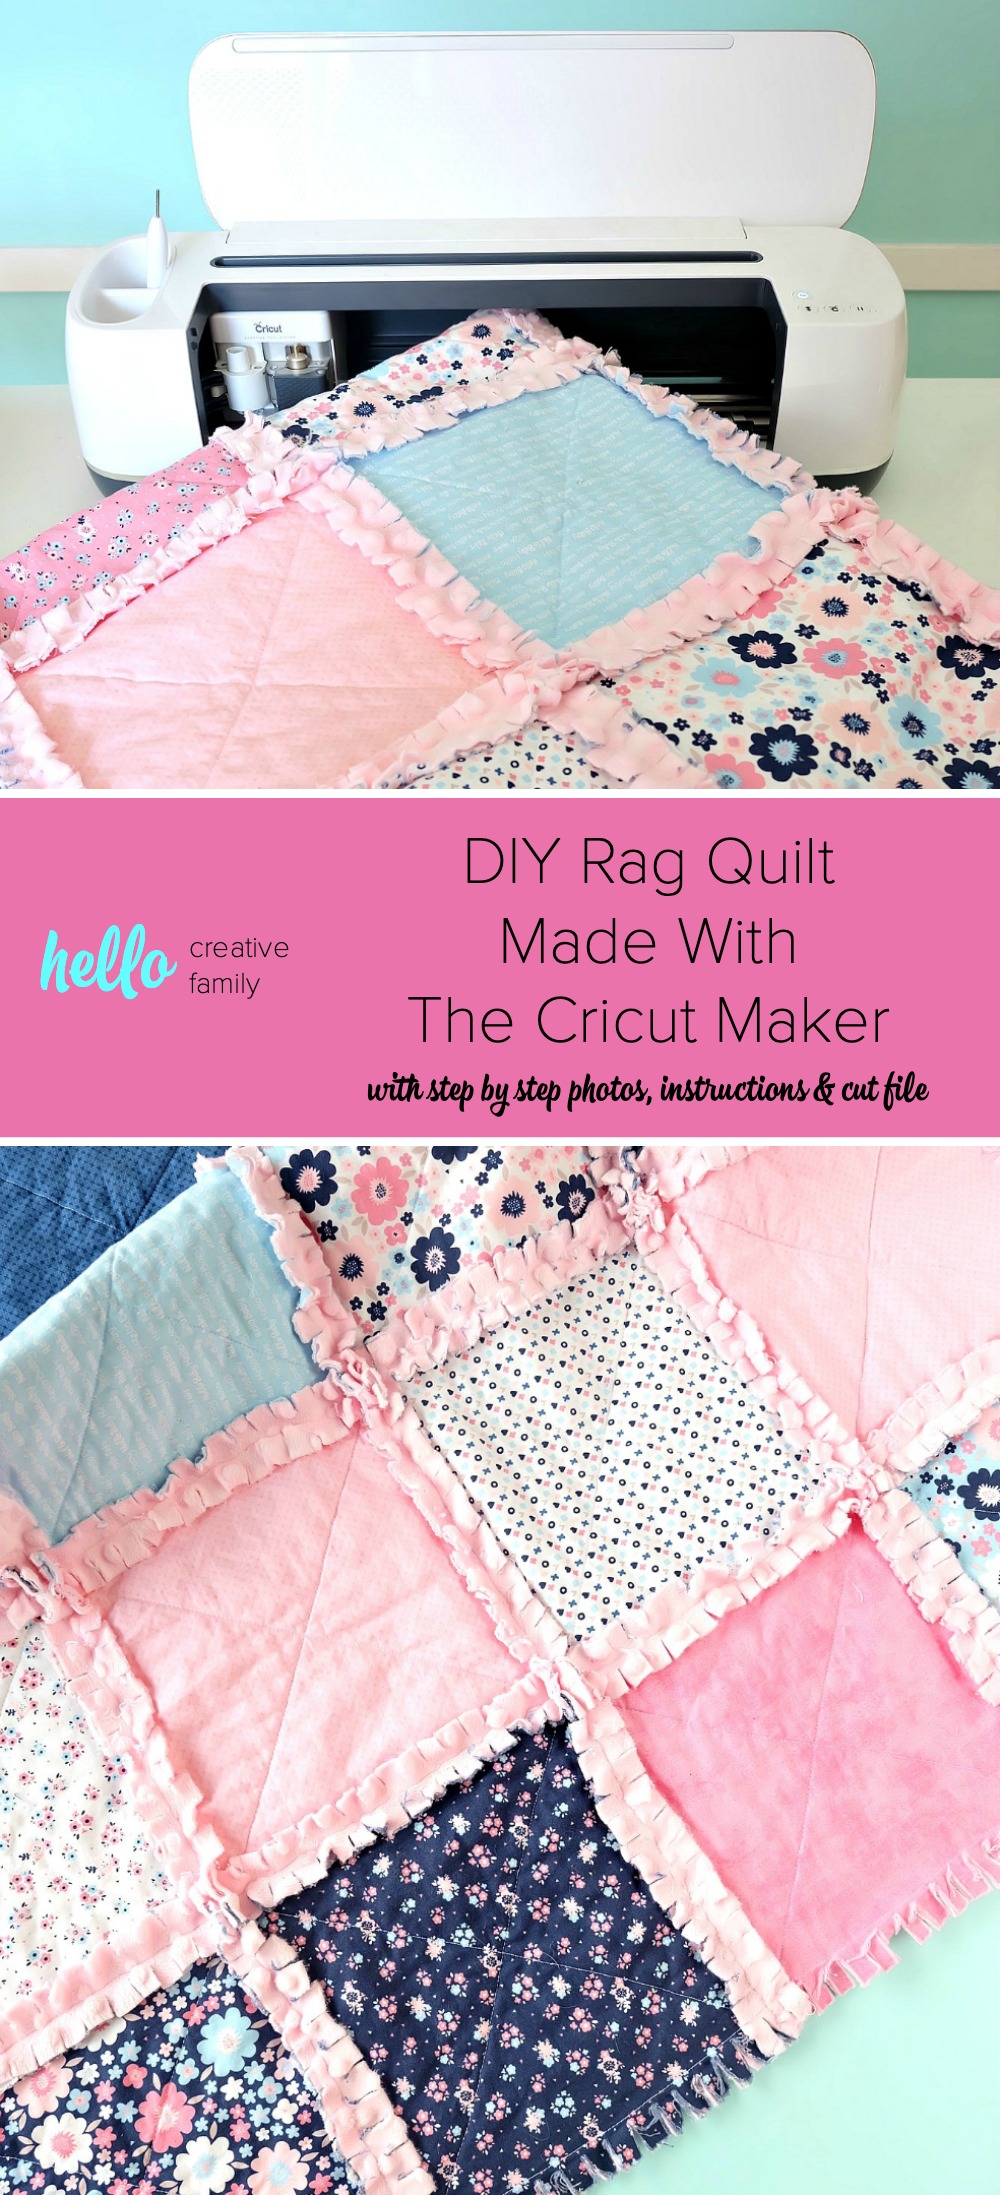 Diy Rag Quilt Made With The Cricut Maker With Step By Step Photos Instructions And Cut File,Online Data Entry Jobs From Home